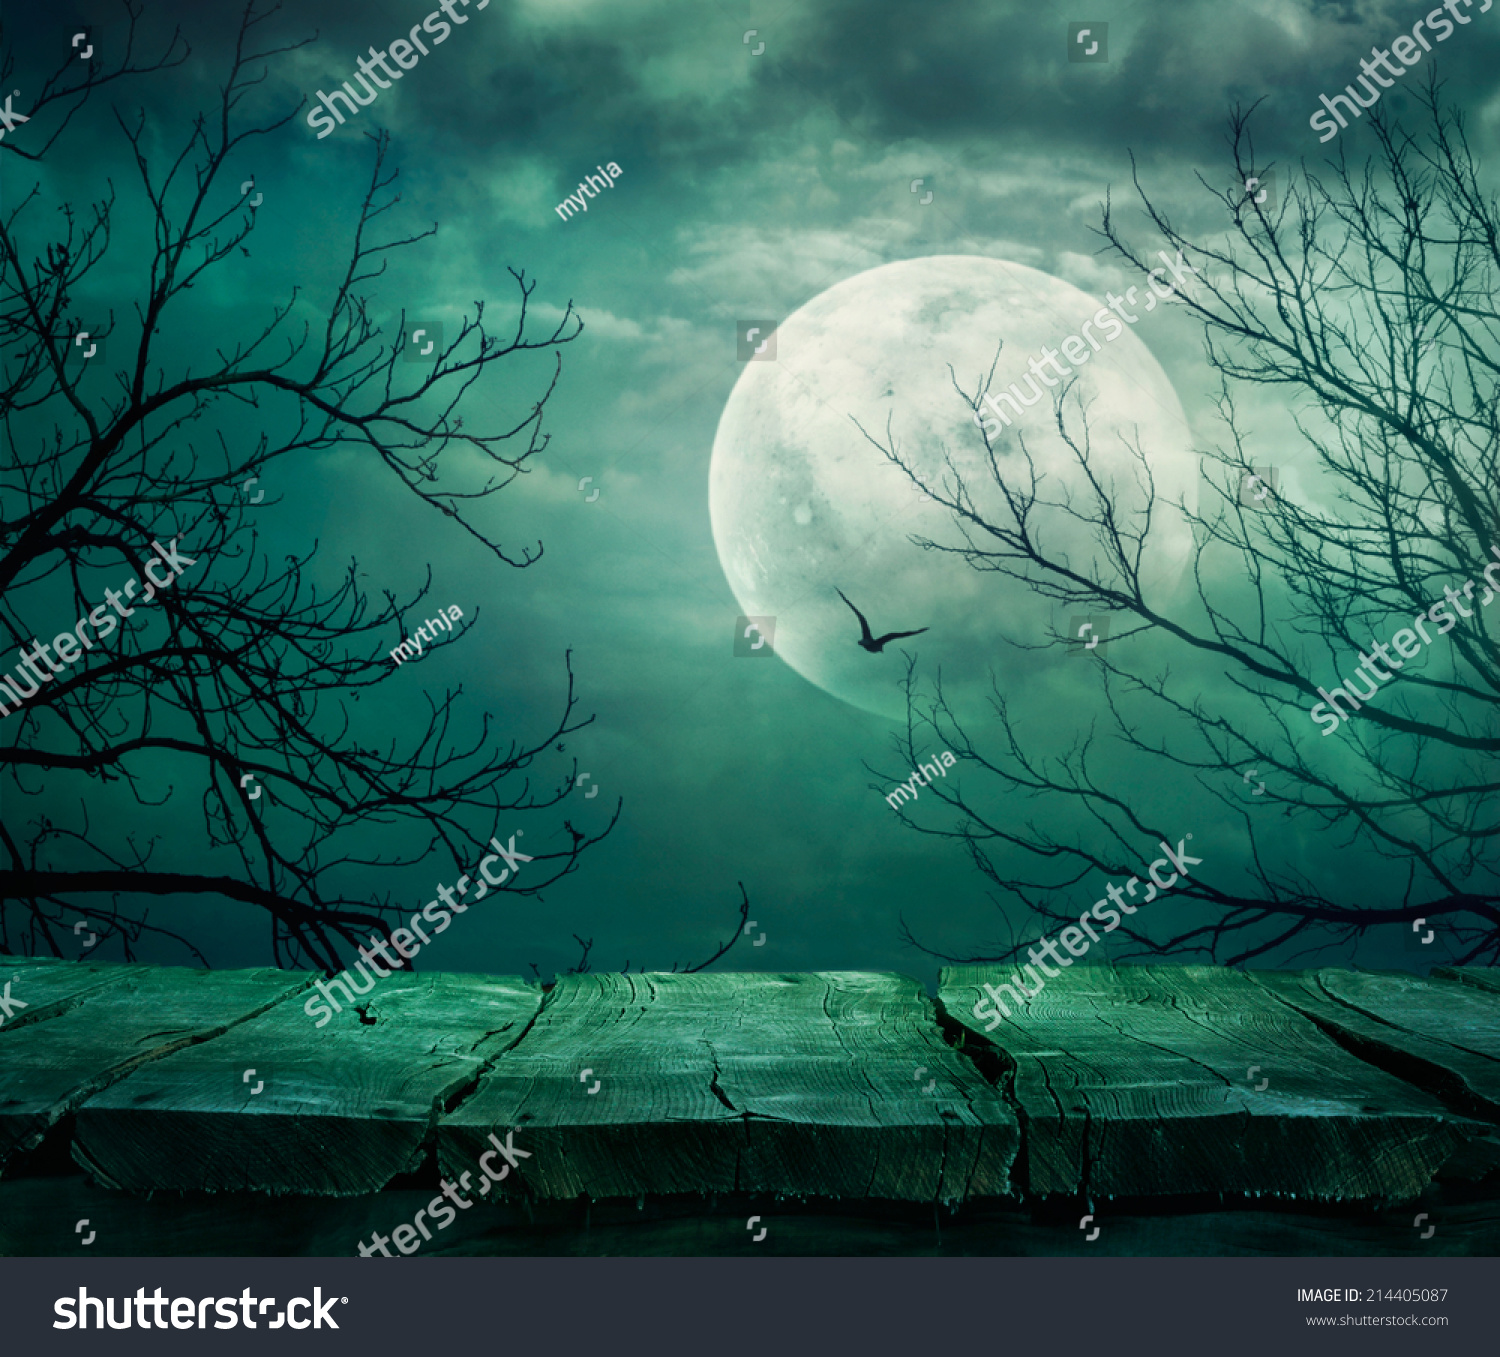 Halloween background. Spooky forest with full moon and wooden table #214405087